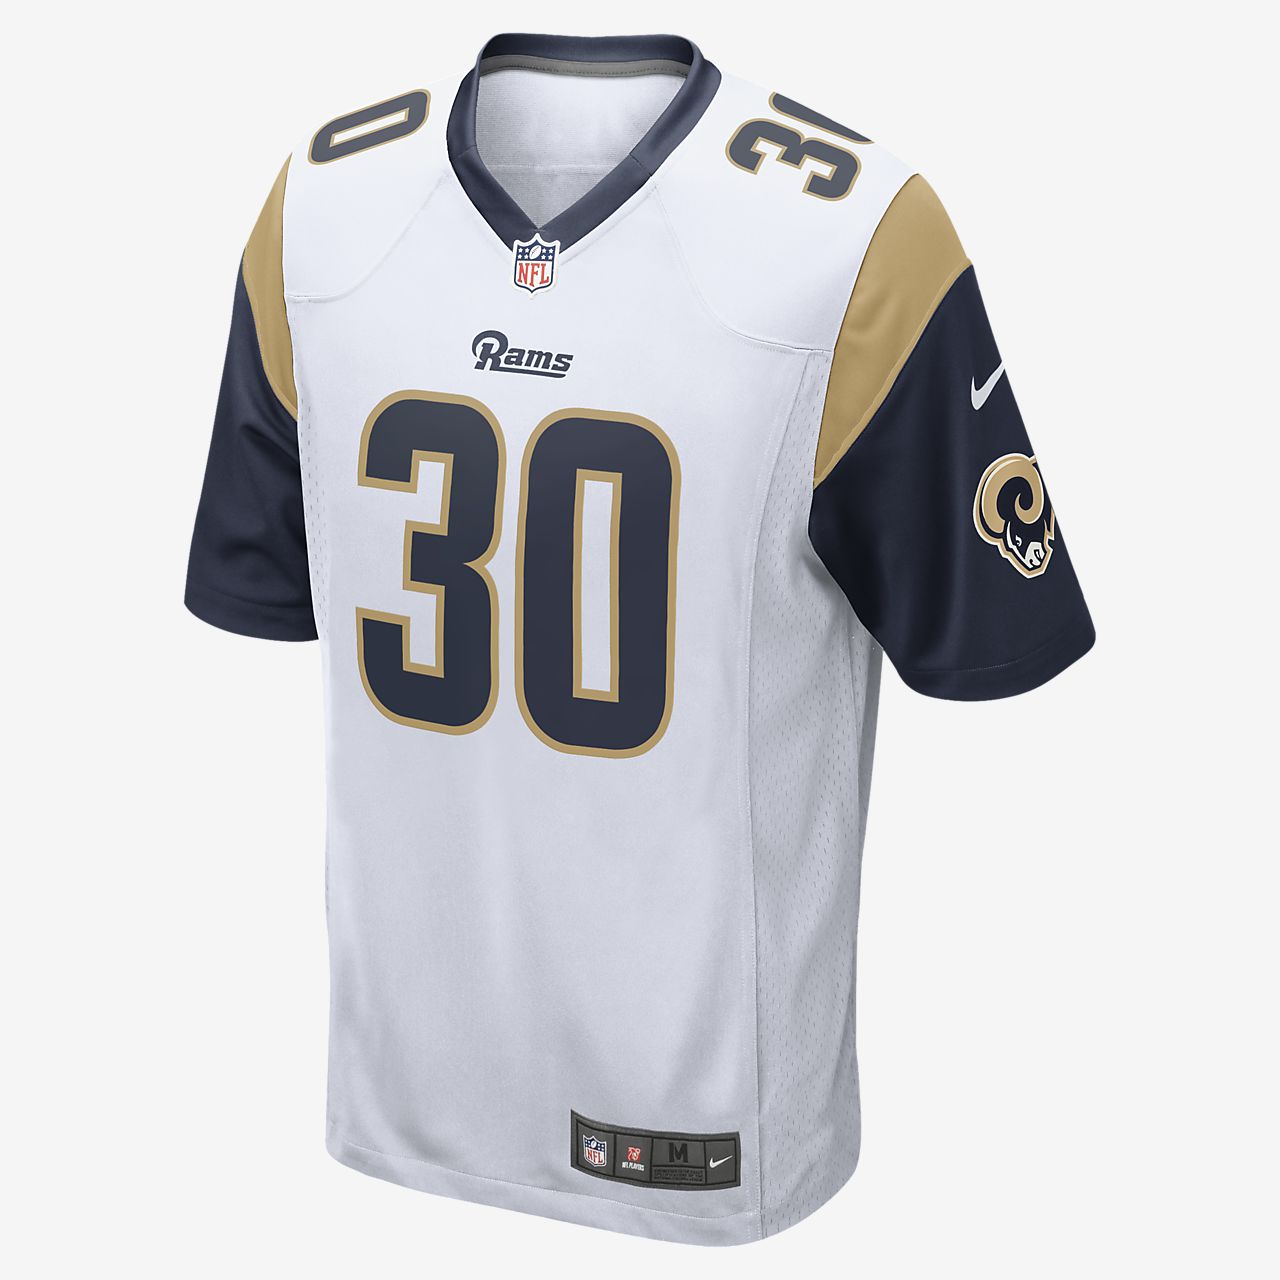 NFL Los Angeles Rams (Todd Gurley) Men's Game Football Jersey. Nike.com